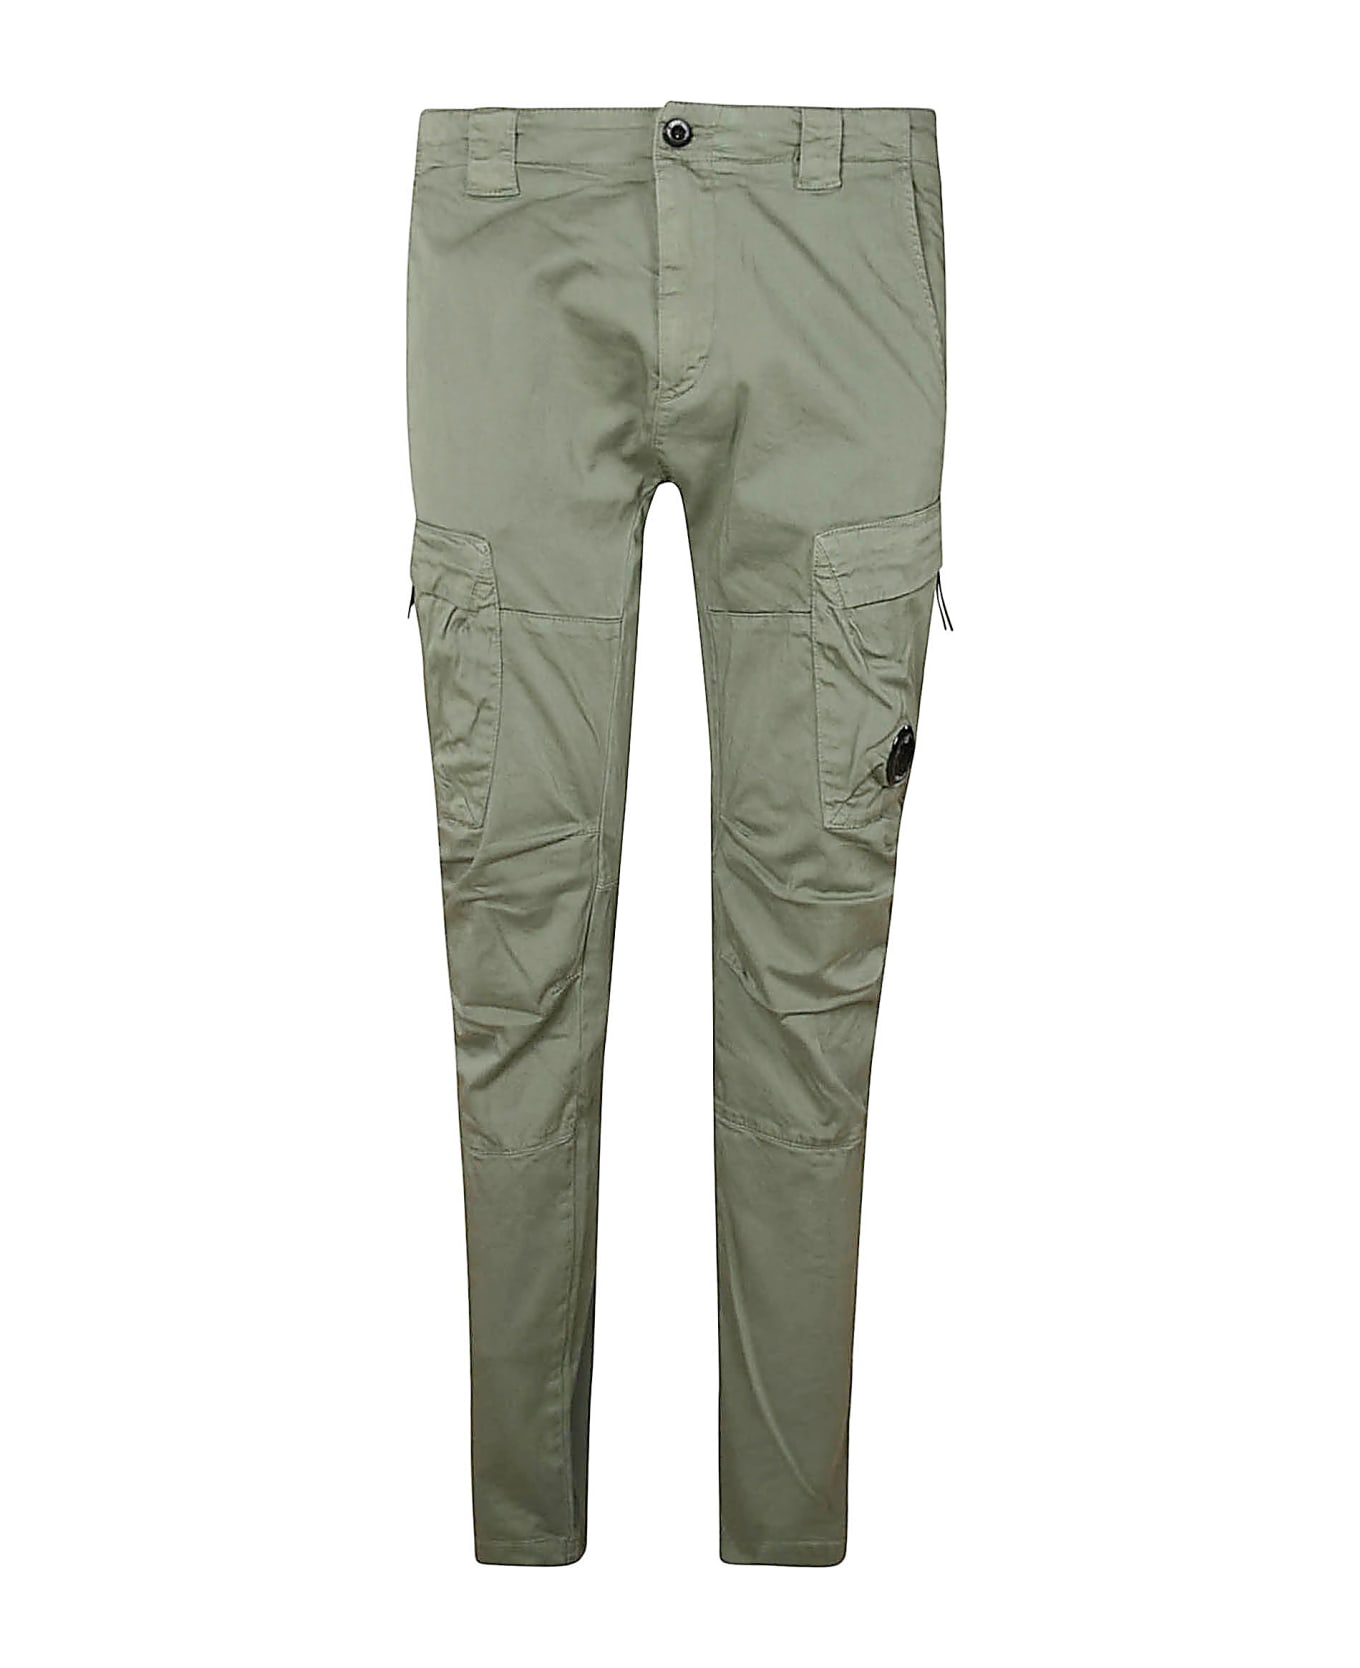 C.P. Company Satin Stretch Cargo Pants - Agave Green